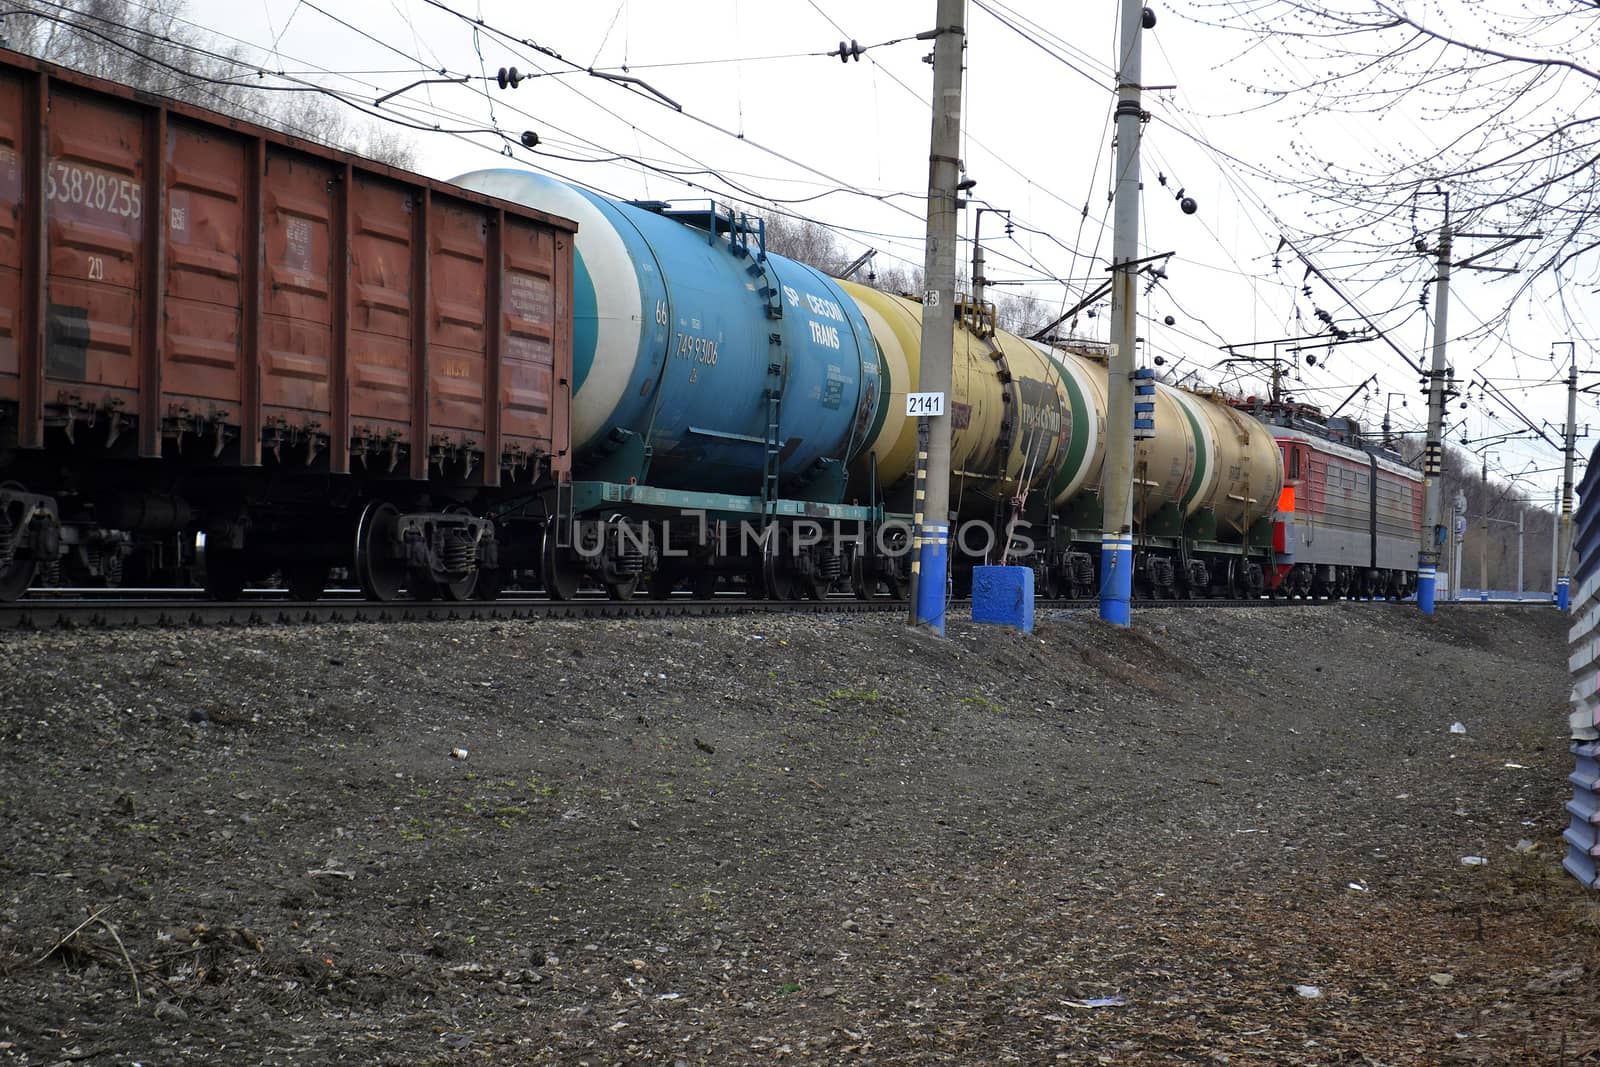 The cargo train with tanks moves on railway tracks